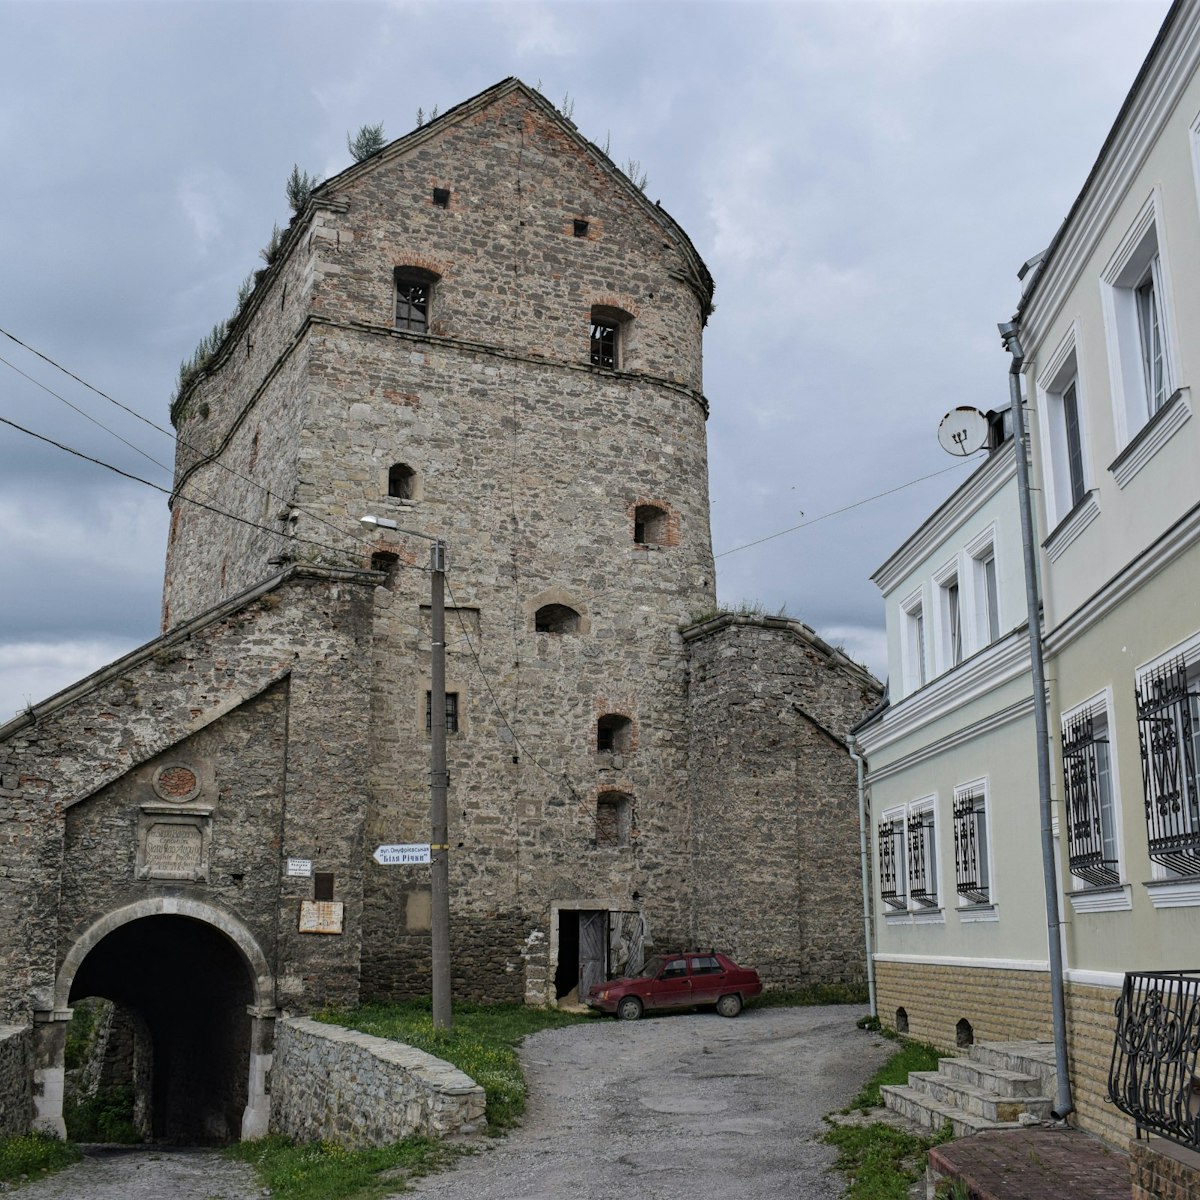 The Windy Gate in Kamyanets-Podilsky.